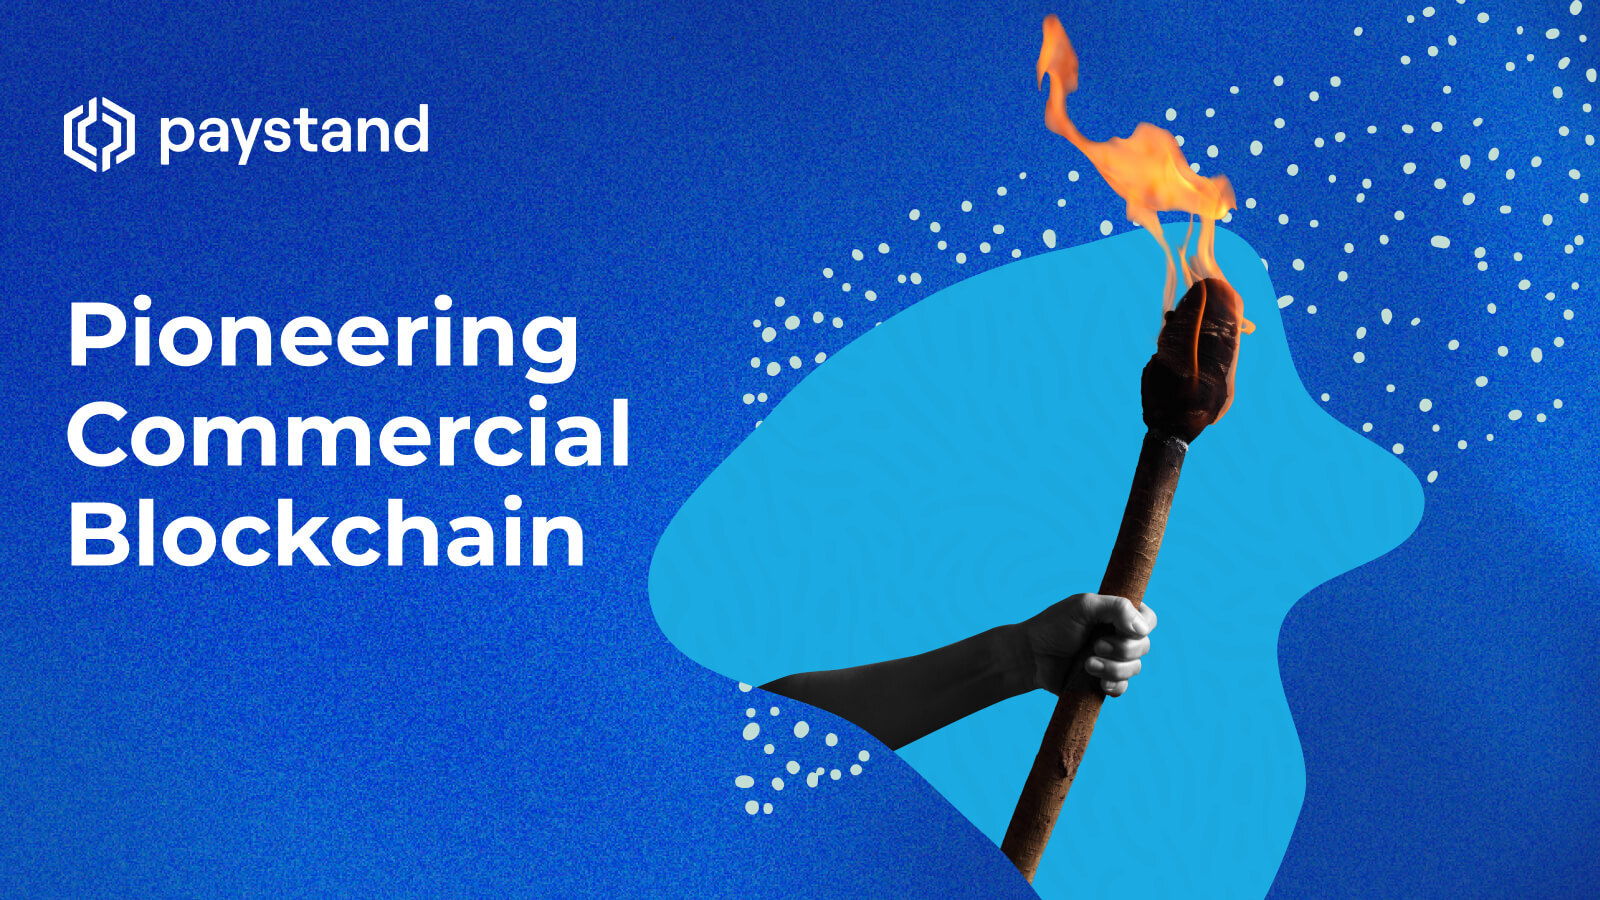 Paystand: Pioneering Commercial Blockchain